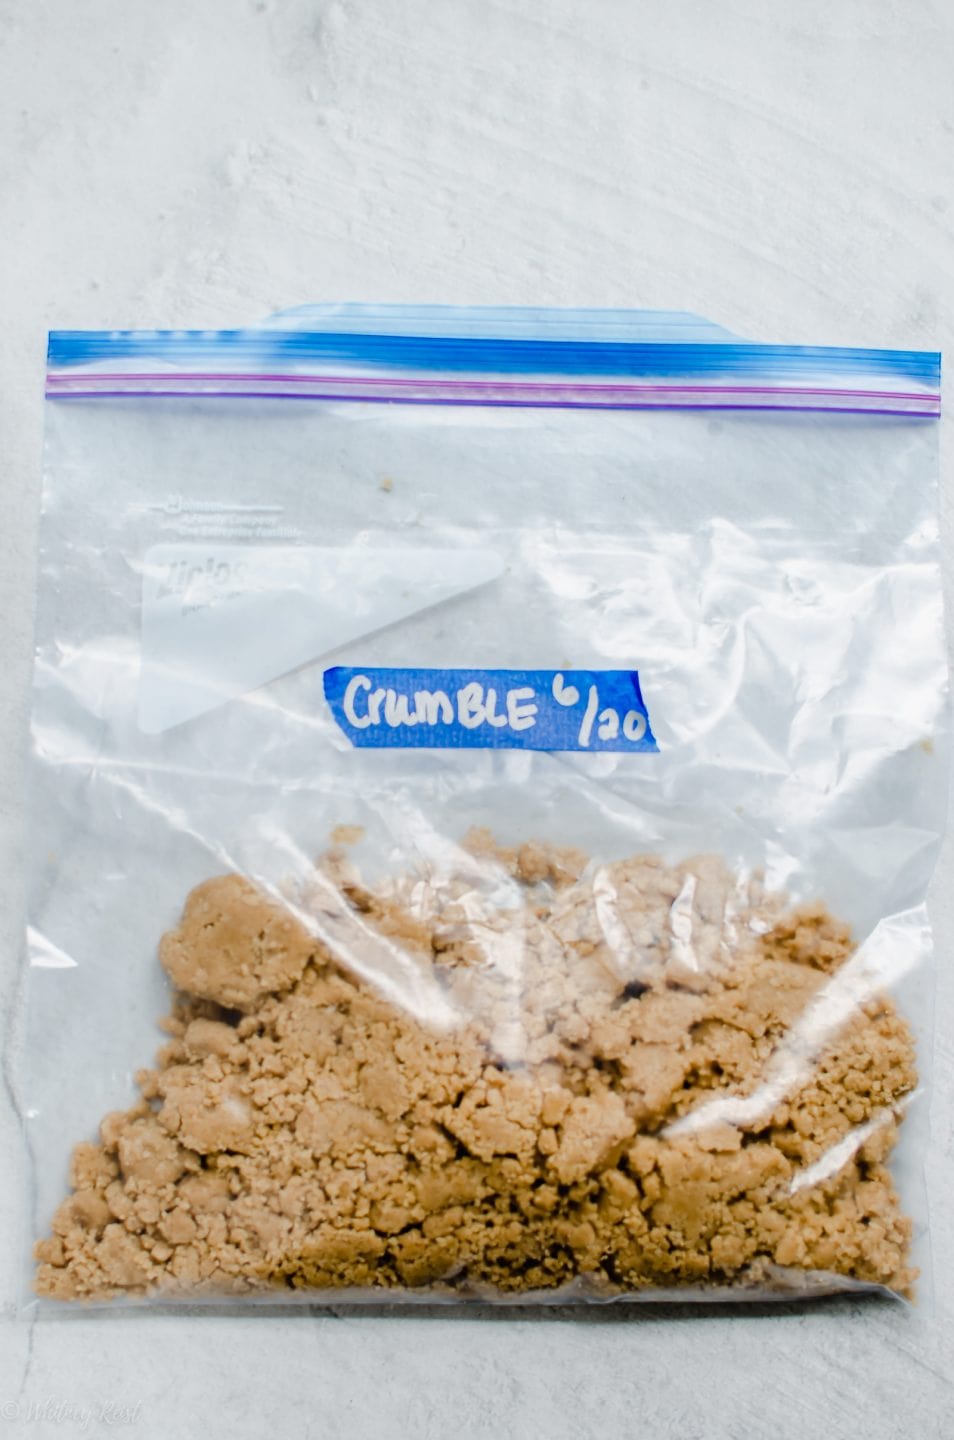 A freezer bag filled with fruit crumble topping.